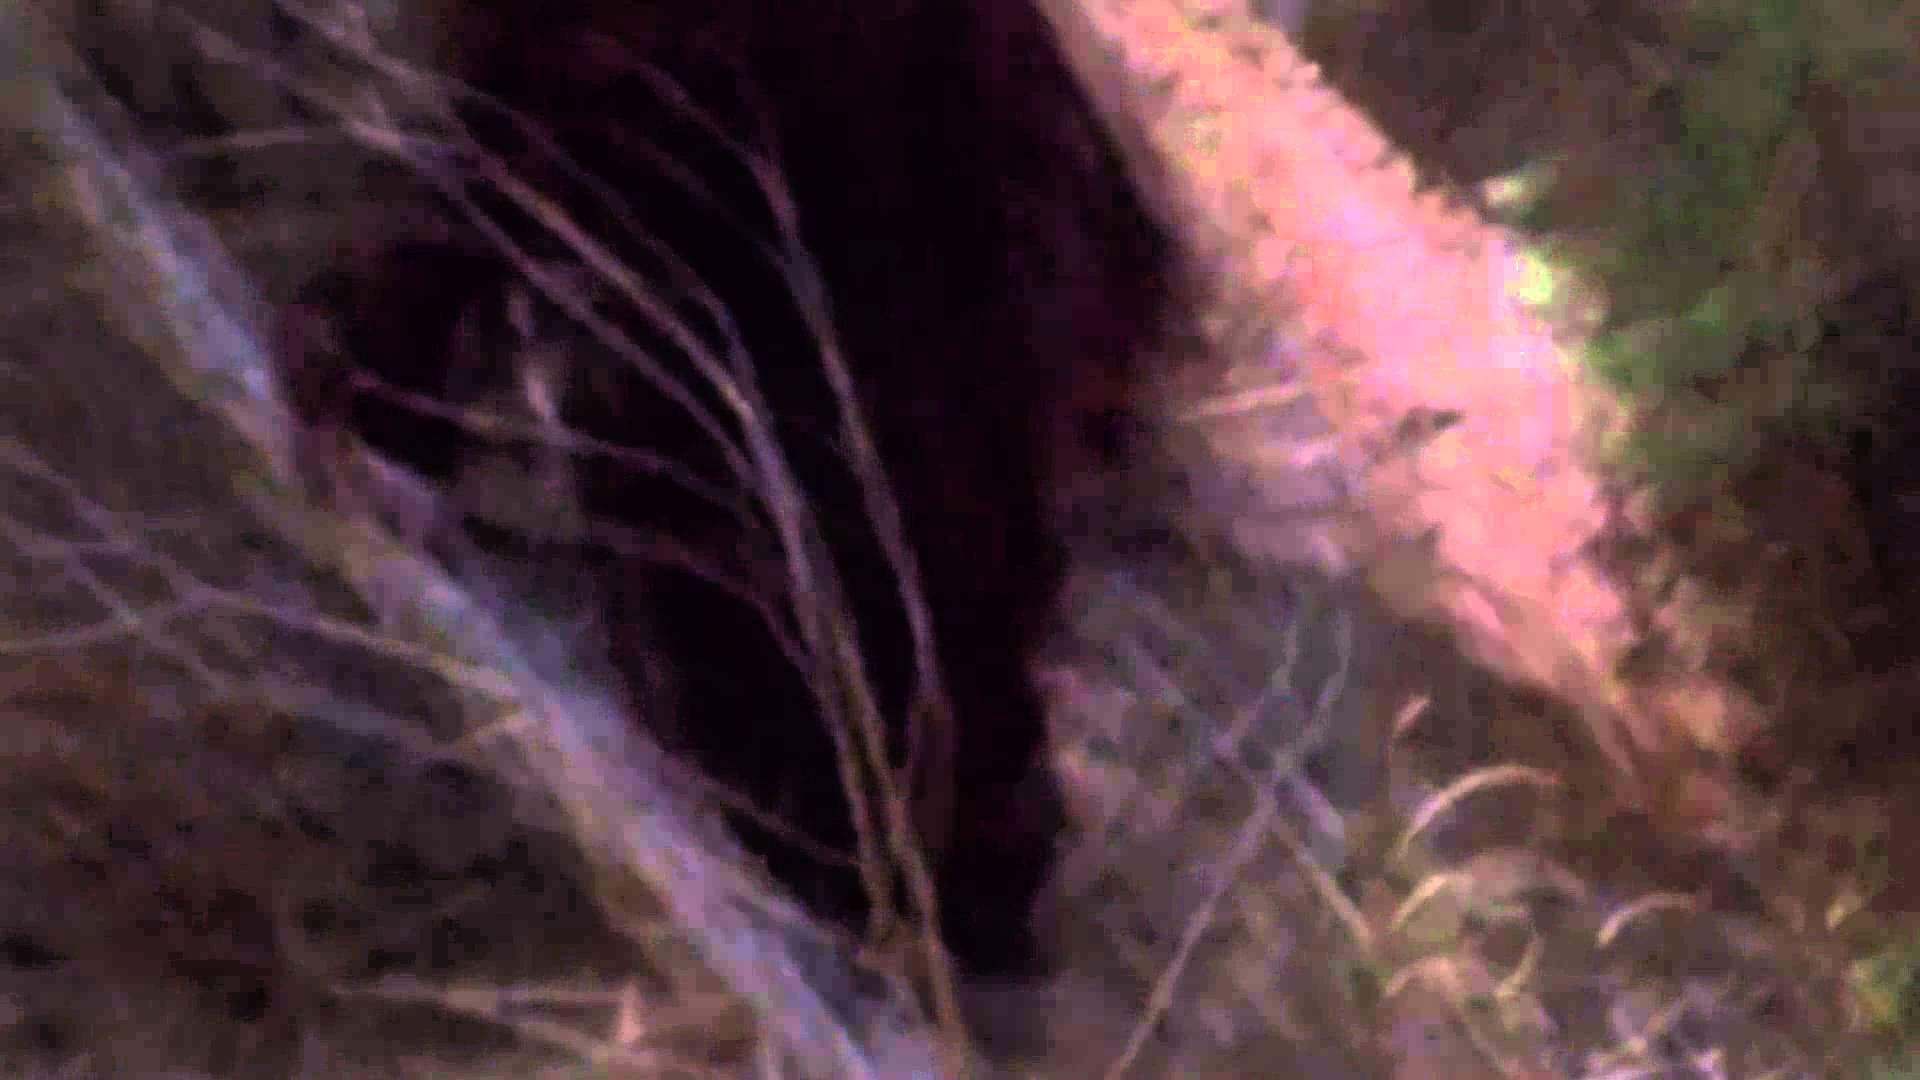 Bigfoot captured on film in Sequoia National Park - YouTube